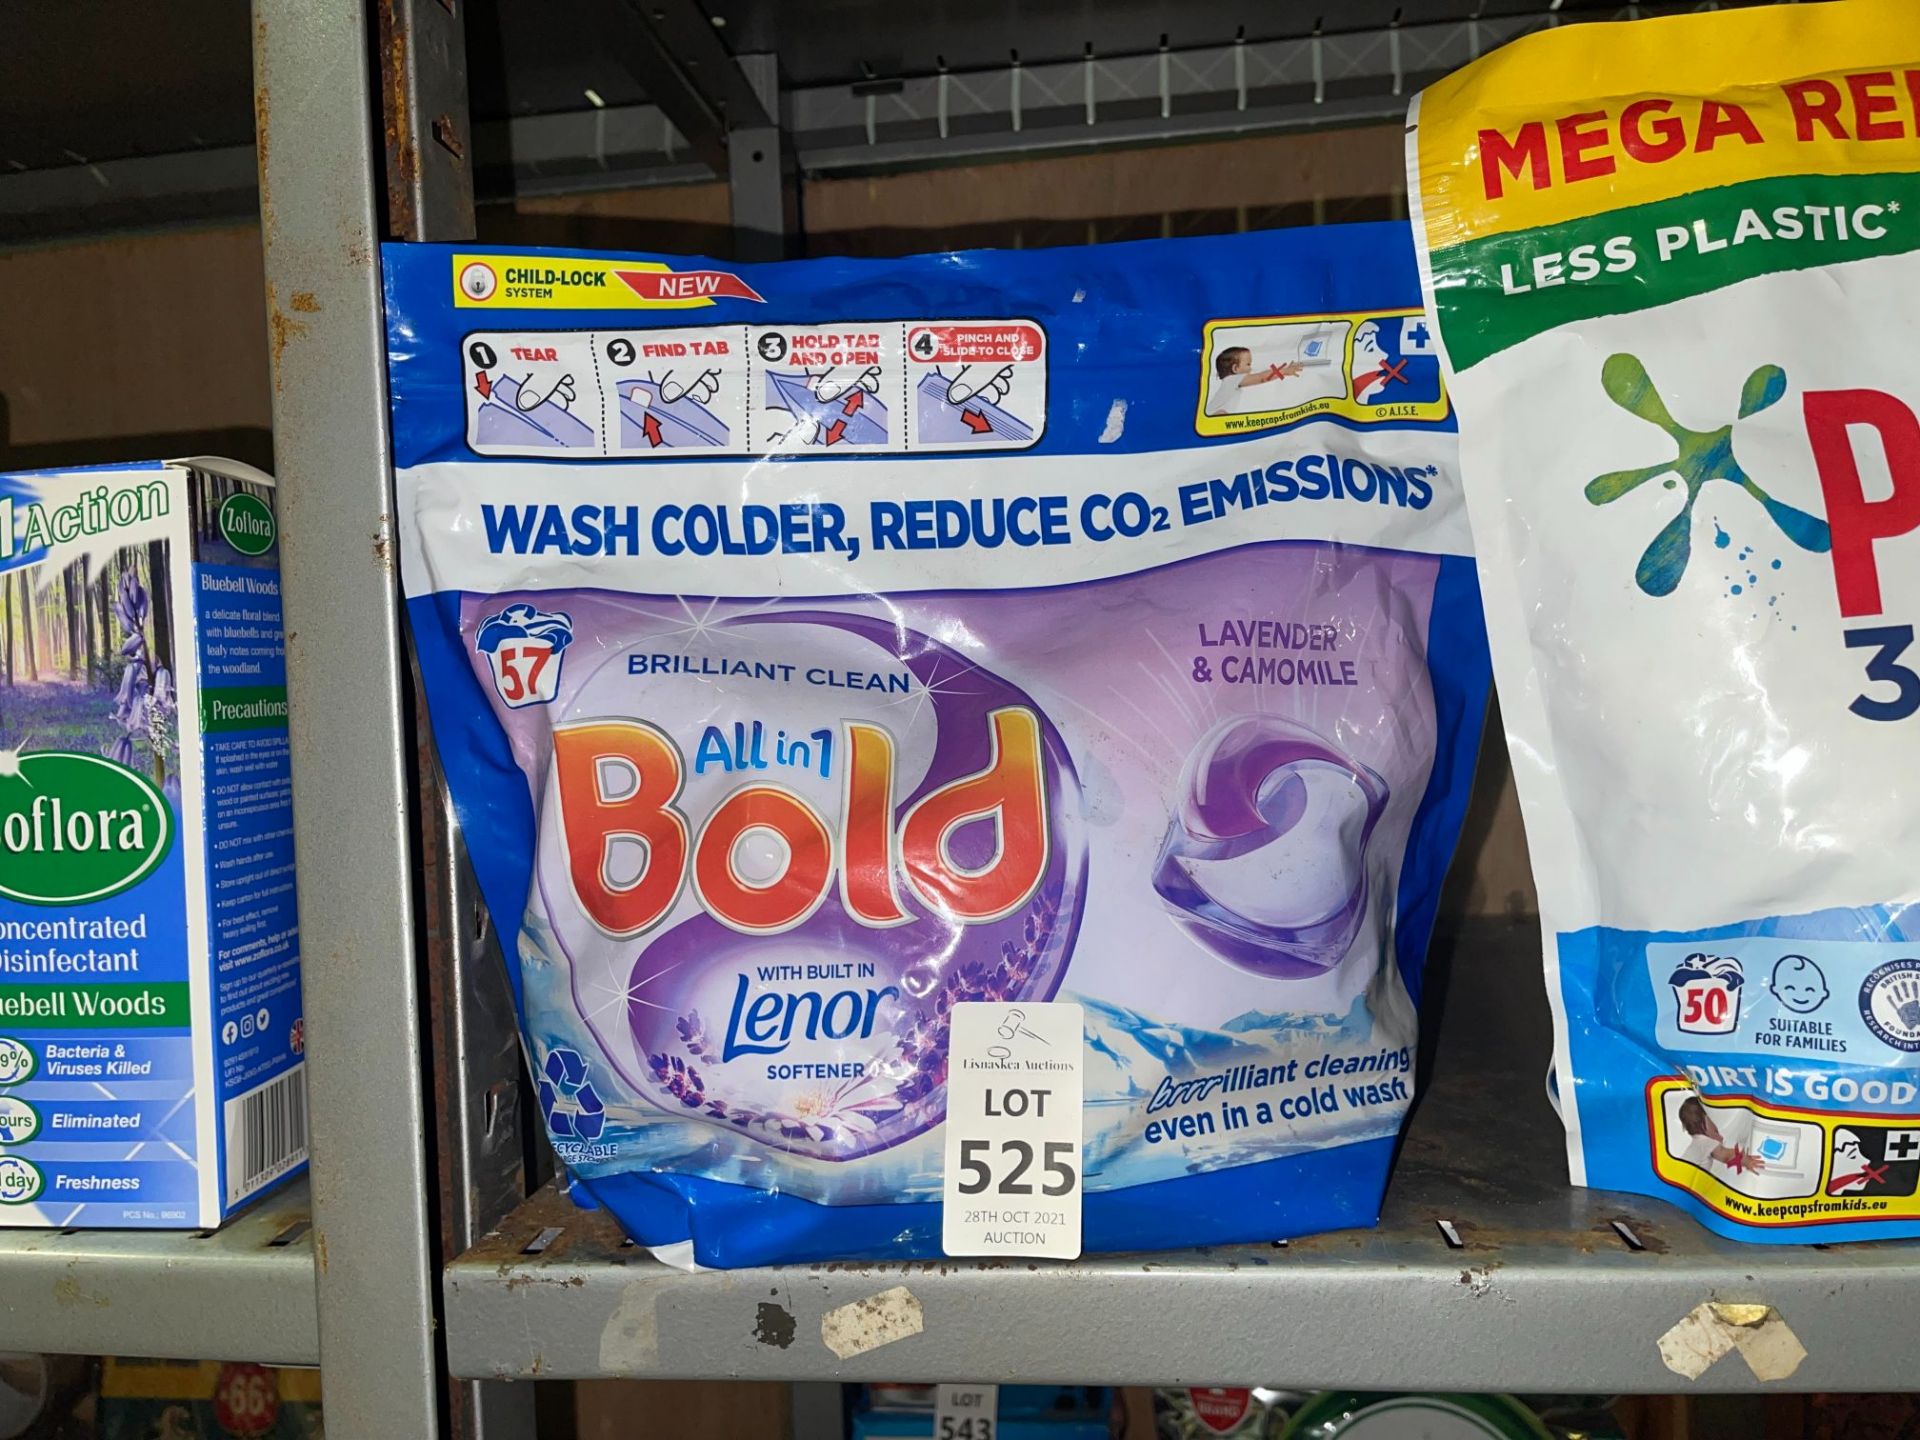 PACK OF BOLD WASHING PODS